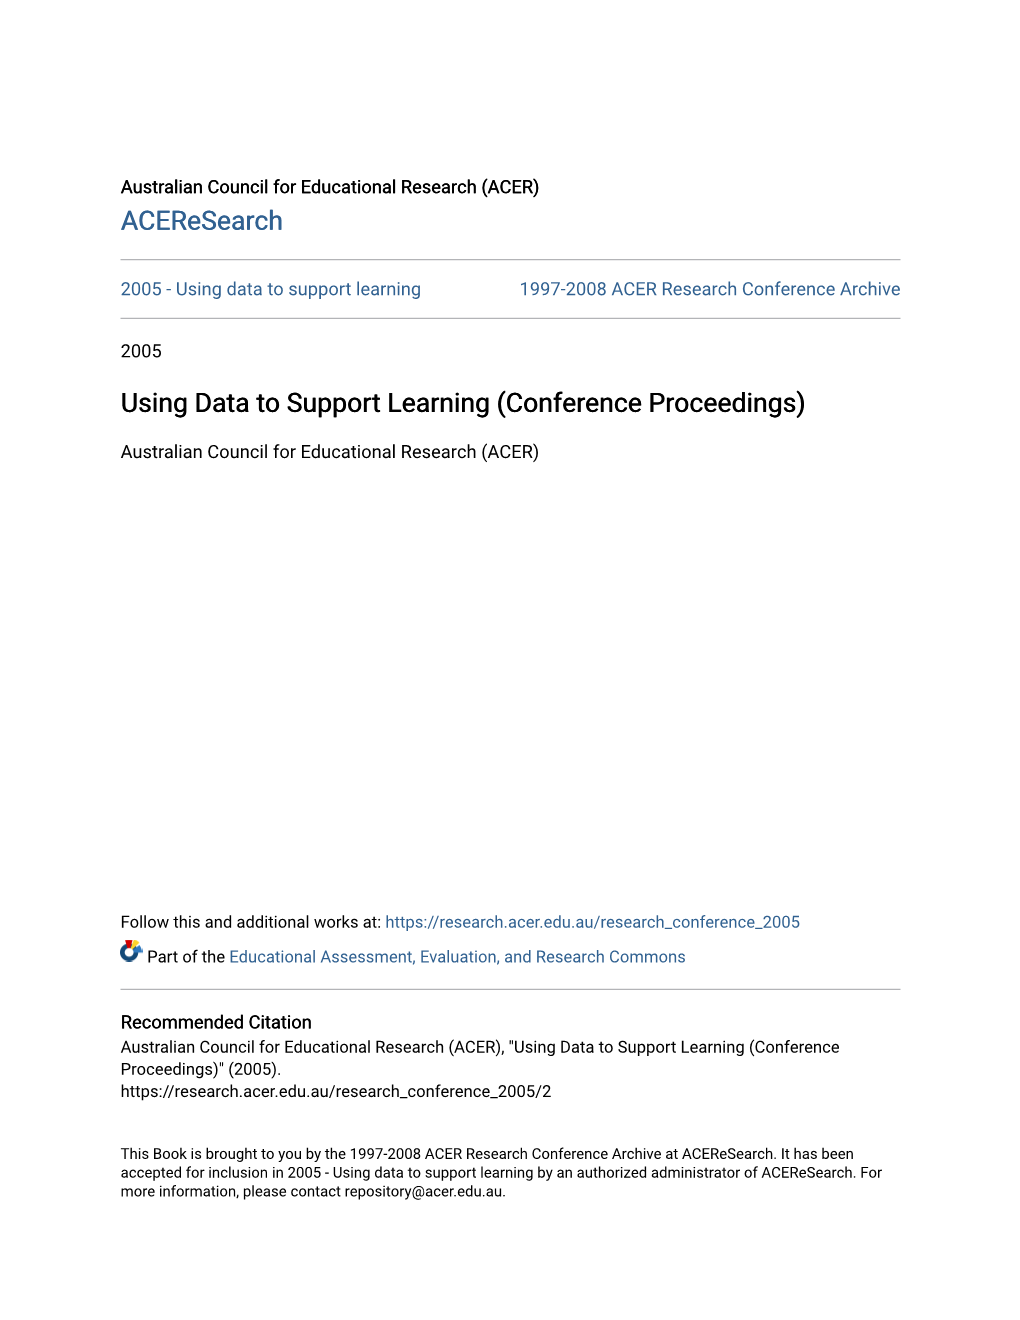 Using Data to Support Learning (Conference Proceedings)